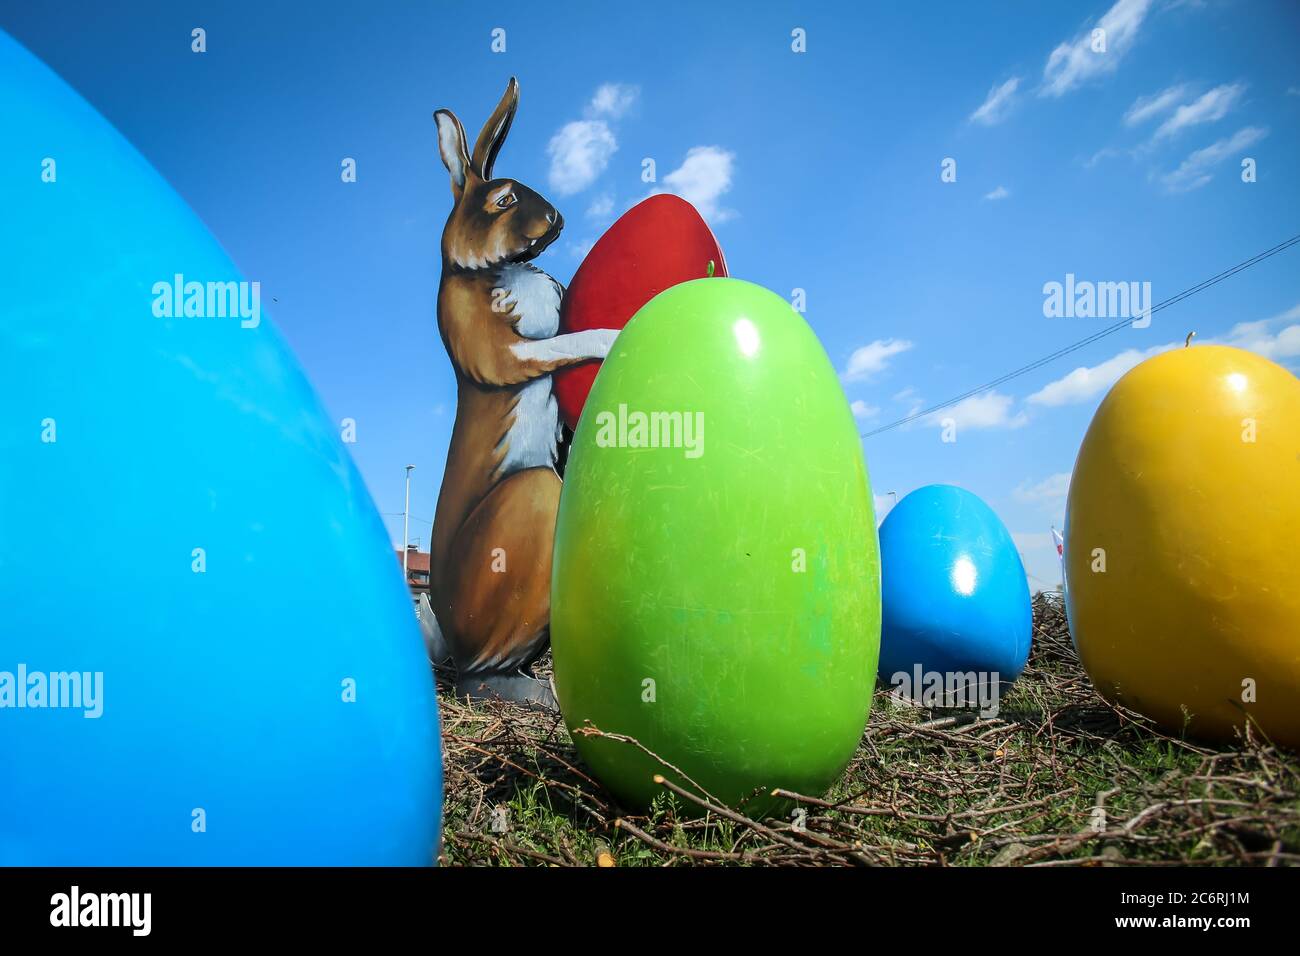 Velika Gorica, Croatia - 21 April, 2017 : A sculpture of a rabbit holding an Easter egg in its paws and surrounded by Easter eggs on the streets of Ve Stock Photo